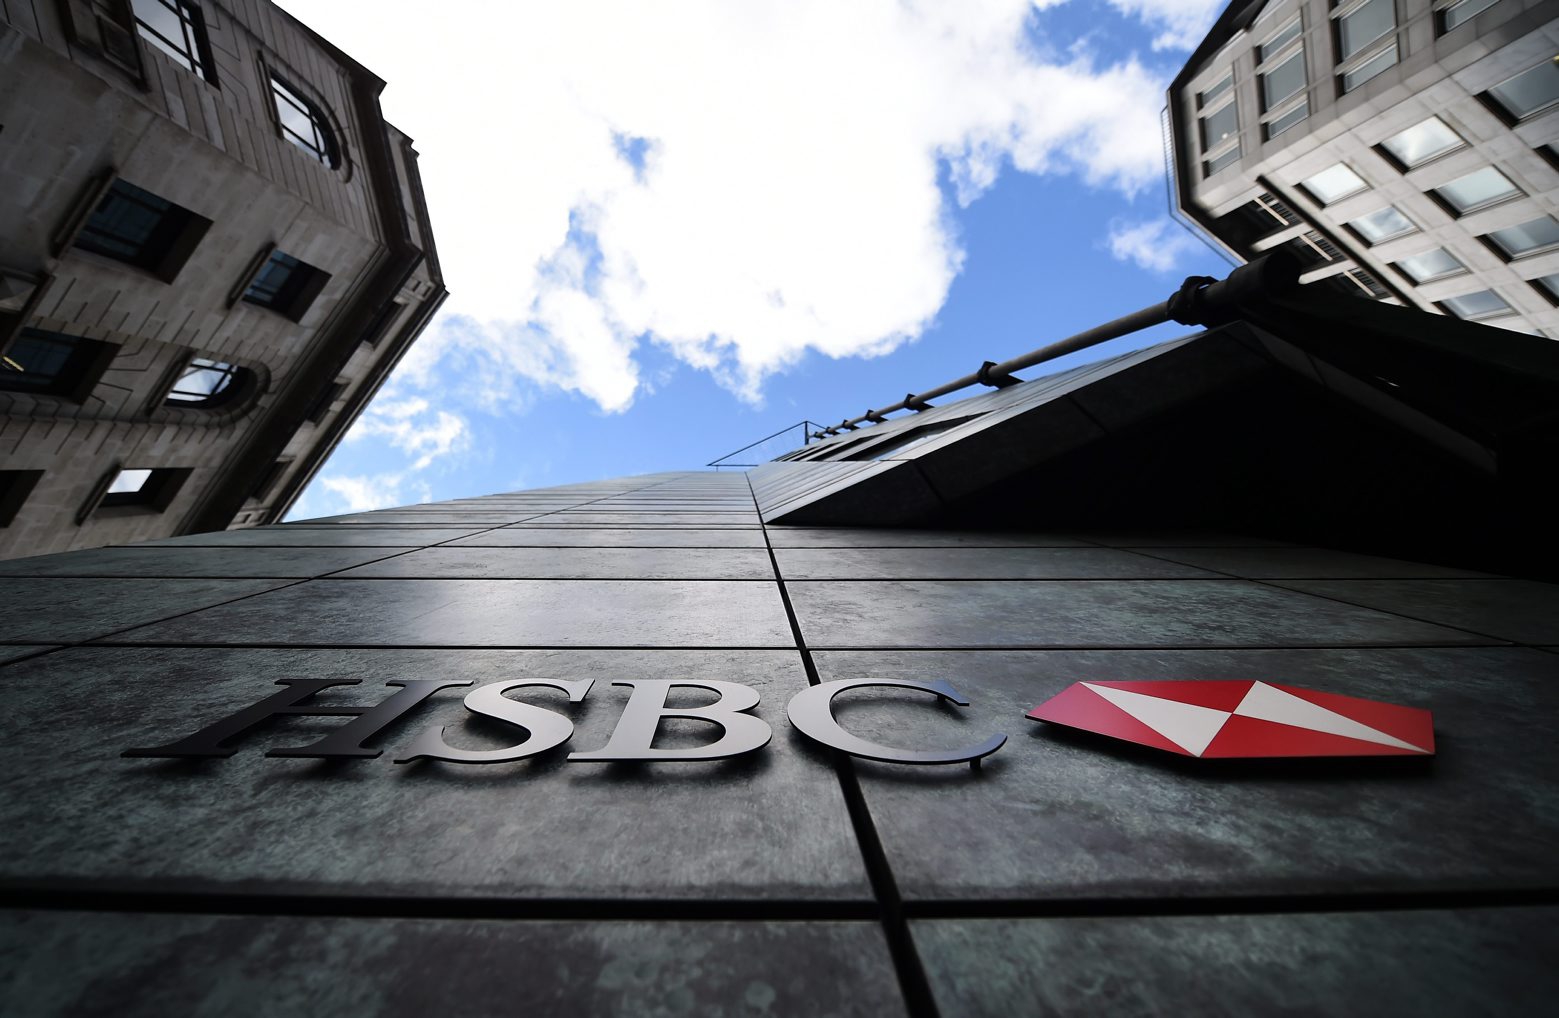 epa08225294 (FILE) - A view of a Hong Kong and Shanghai Banking Corporation (HSBC) bank branch in London, Britain, 09 June 2015 (reissued 18 February 2020). According to the bank's interim CEO Noel Quinn, HSBC is set to slash some 35,000 of its global workforce and shed around 100 billion US dollar in assets by 2022 in a major overhaul prompted by a dramatic drop in profits, which plunged by about one-third in 2019.  EPA/ANDY RAIN (FILE)  BRITAIN BANKING HSBC RESTRUCTURING